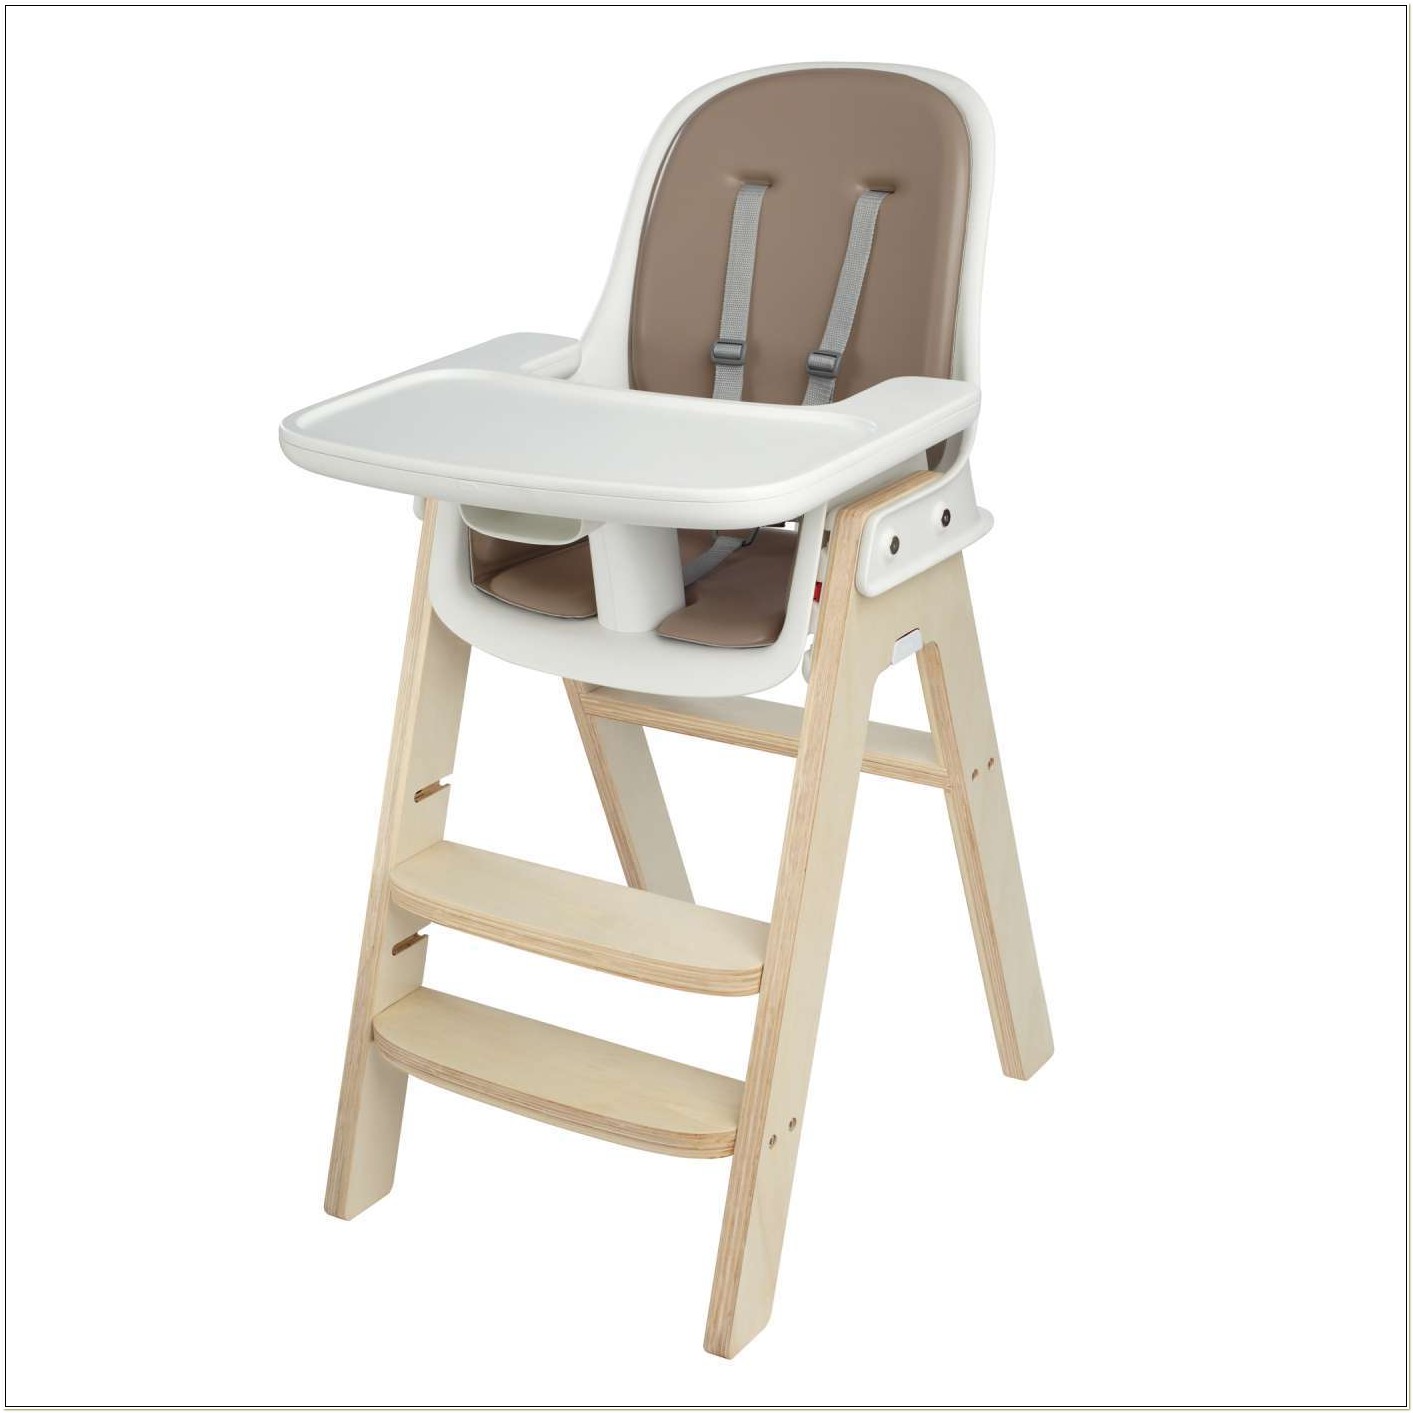 Oxo Baby High Chair - Chairs : Home Decorating Ideas #nOVjnBq1Vx